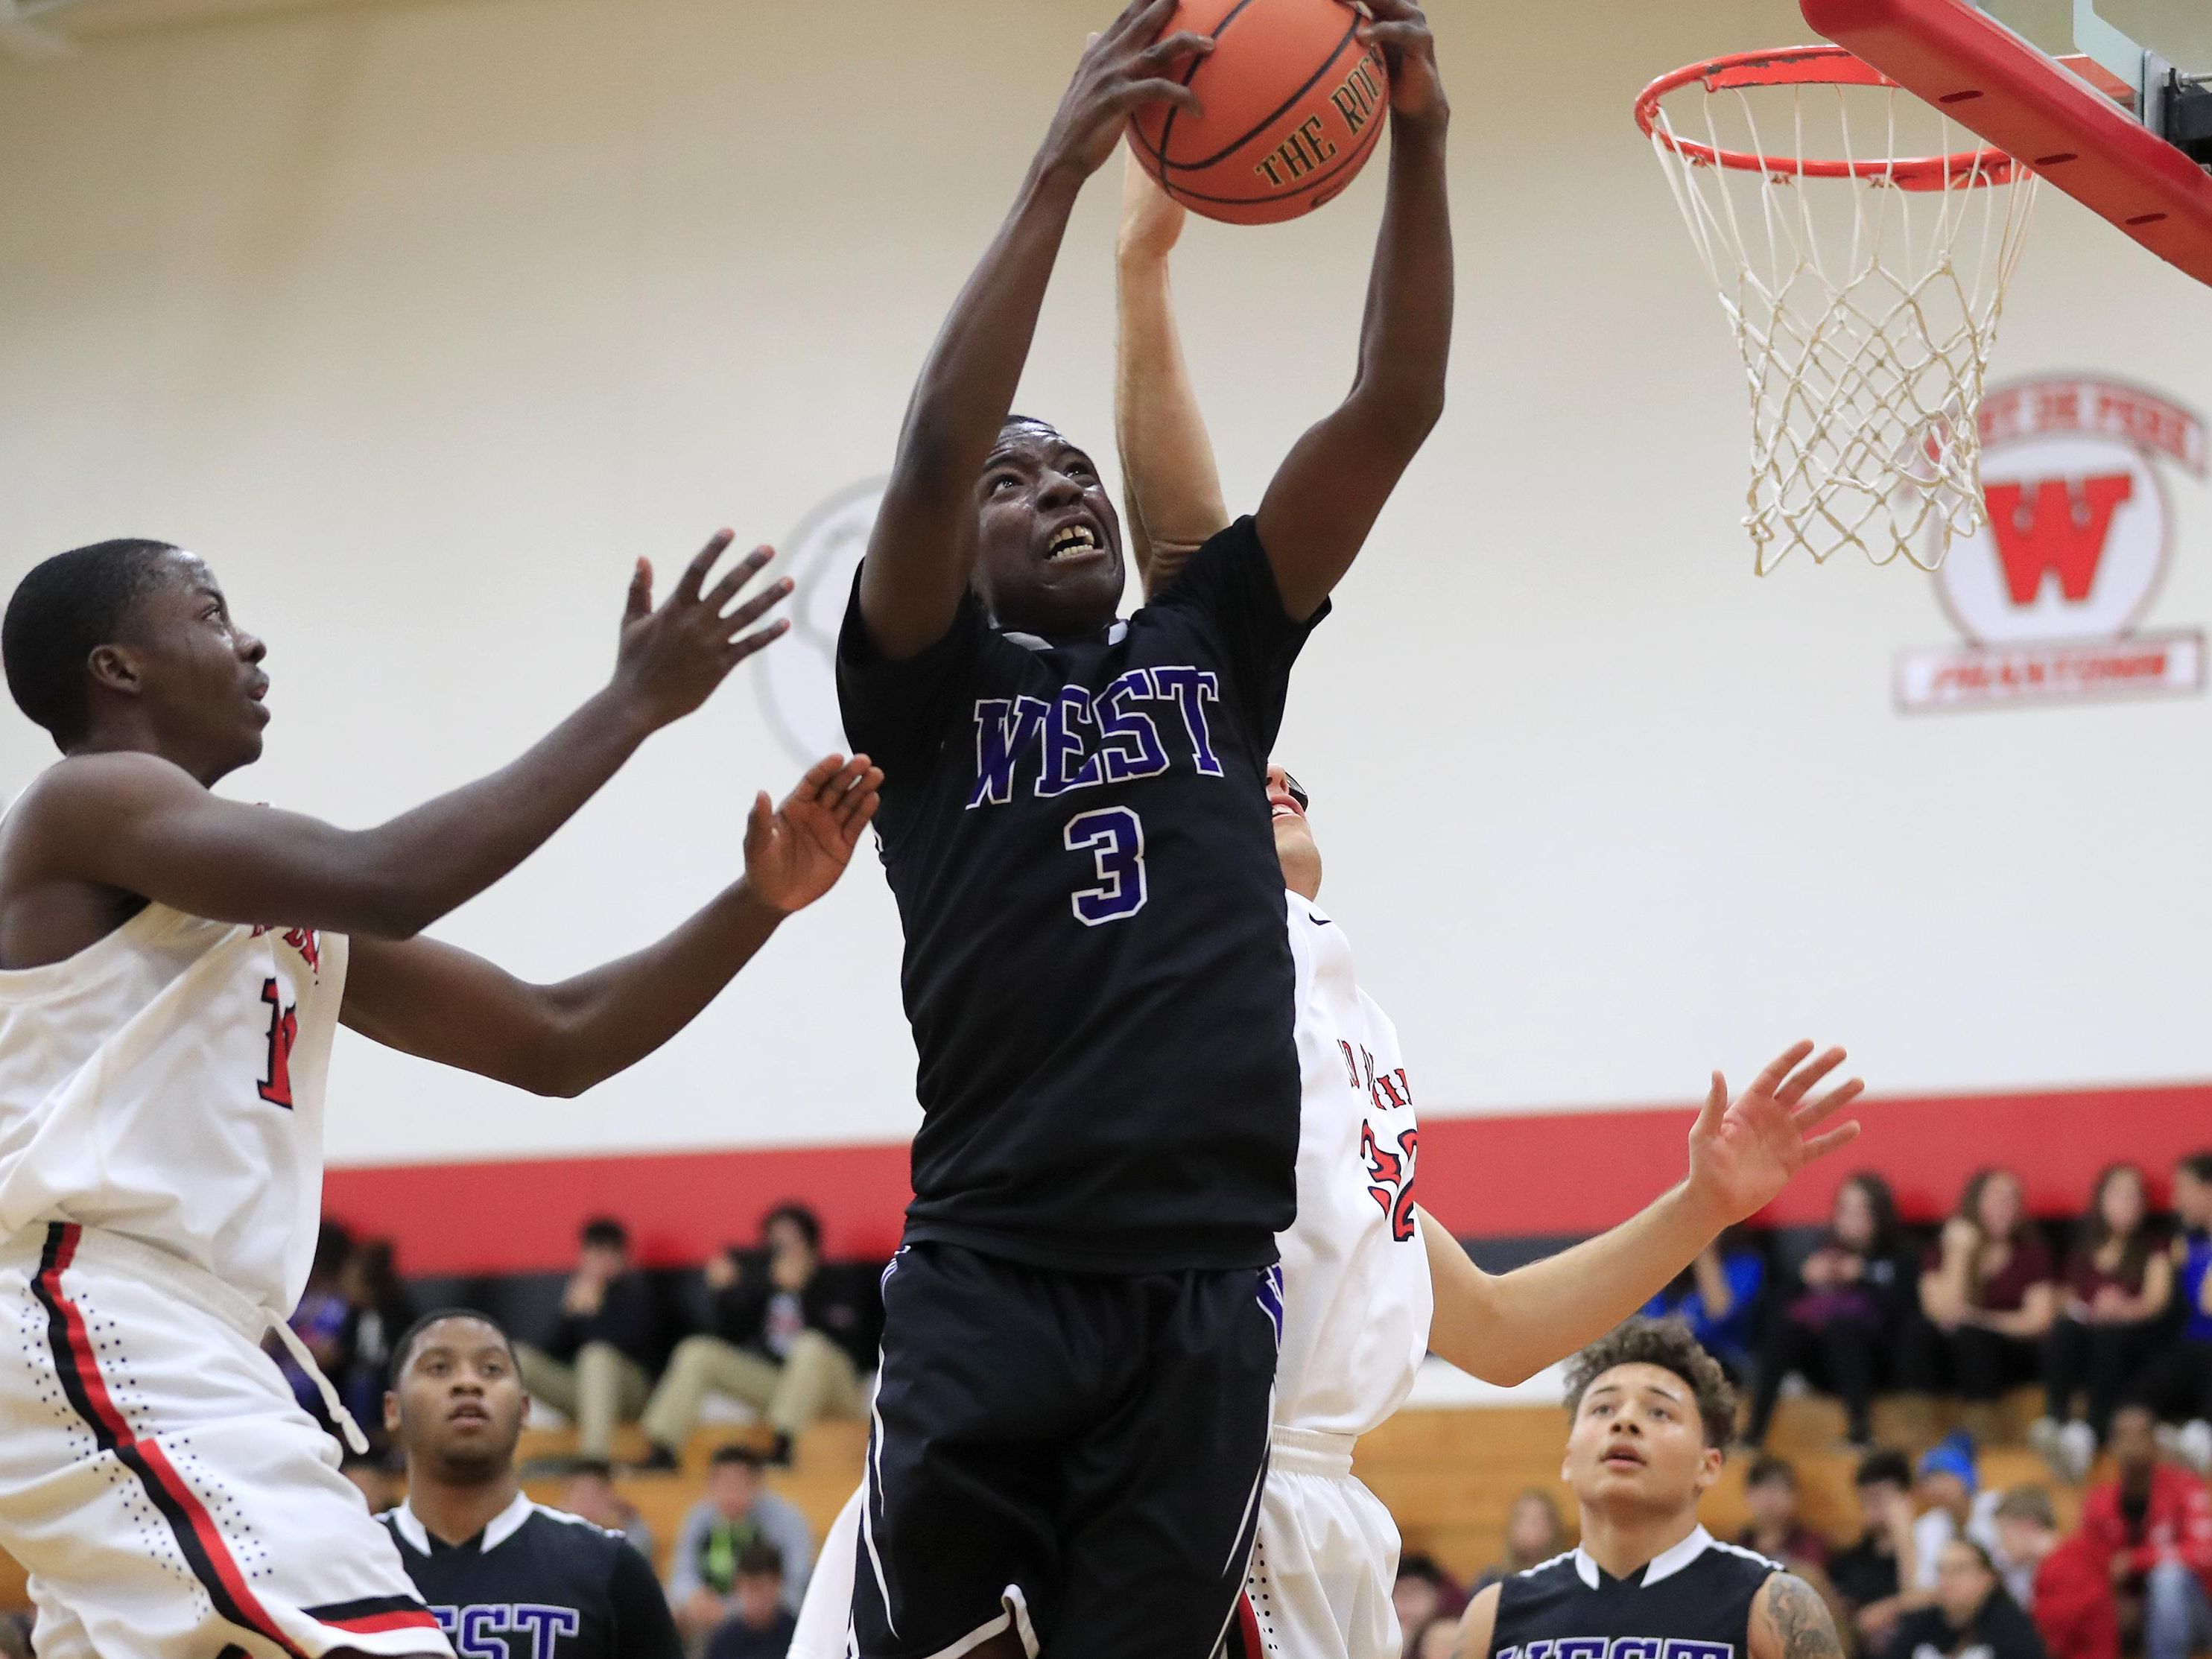 Green Bay West’s JQuail Hanks (3) skies high for a rebound against Green Bay East on Tuesday.